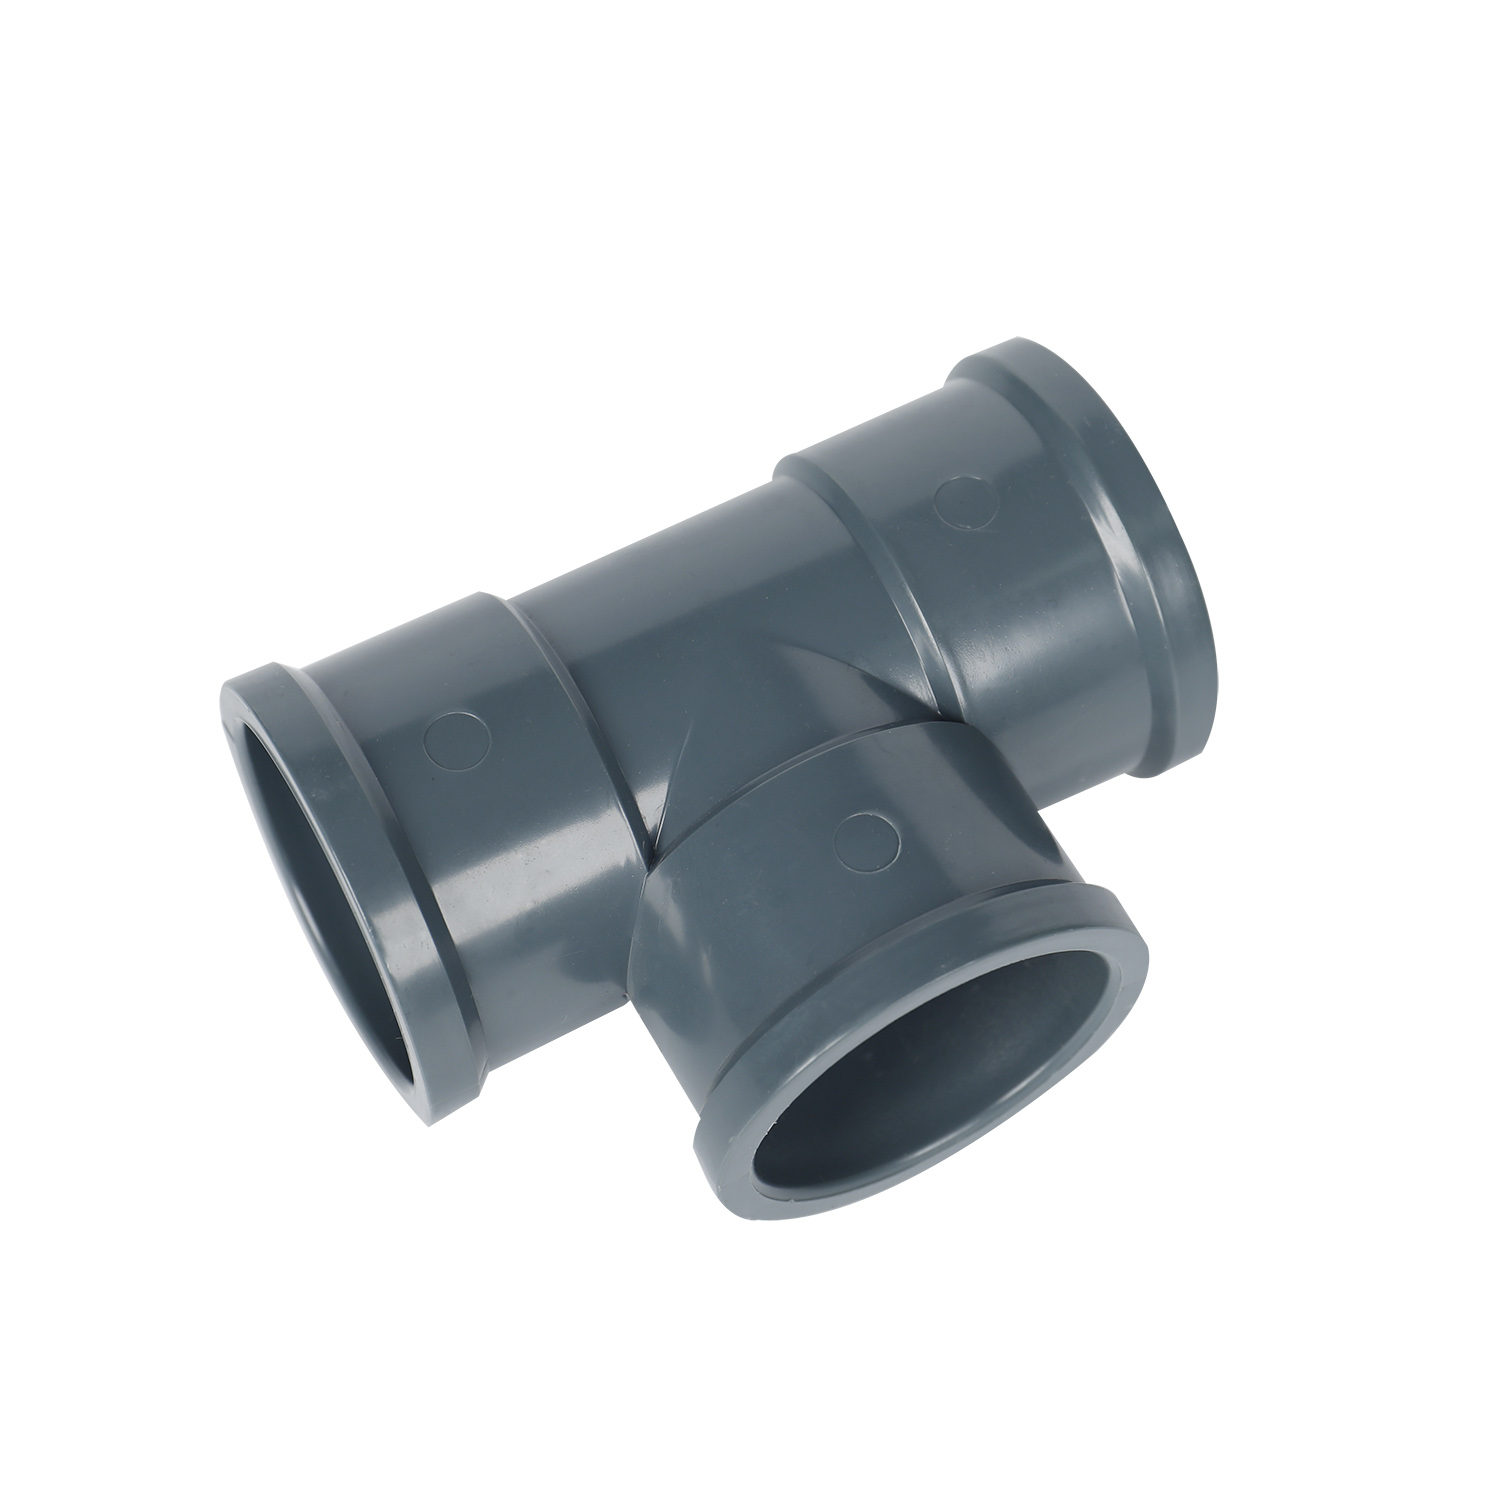 Factory wholesale high quality plastic pvc pipe plumbing fittings manufacturers 3 inch PVC tee fittings supplier